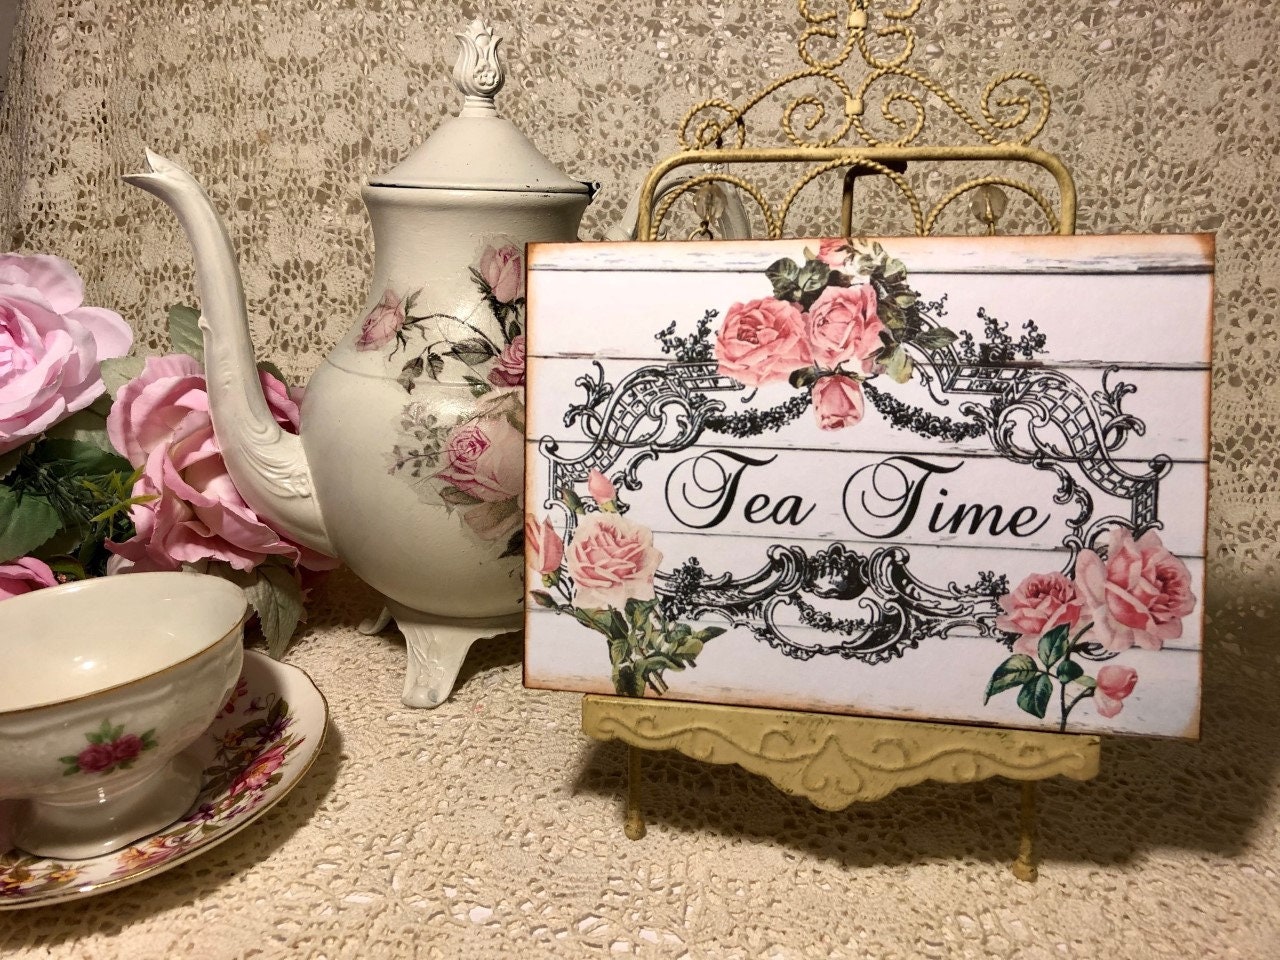 Tea Time Vintage Style Shabby Chic Plaque / Sign 5x7